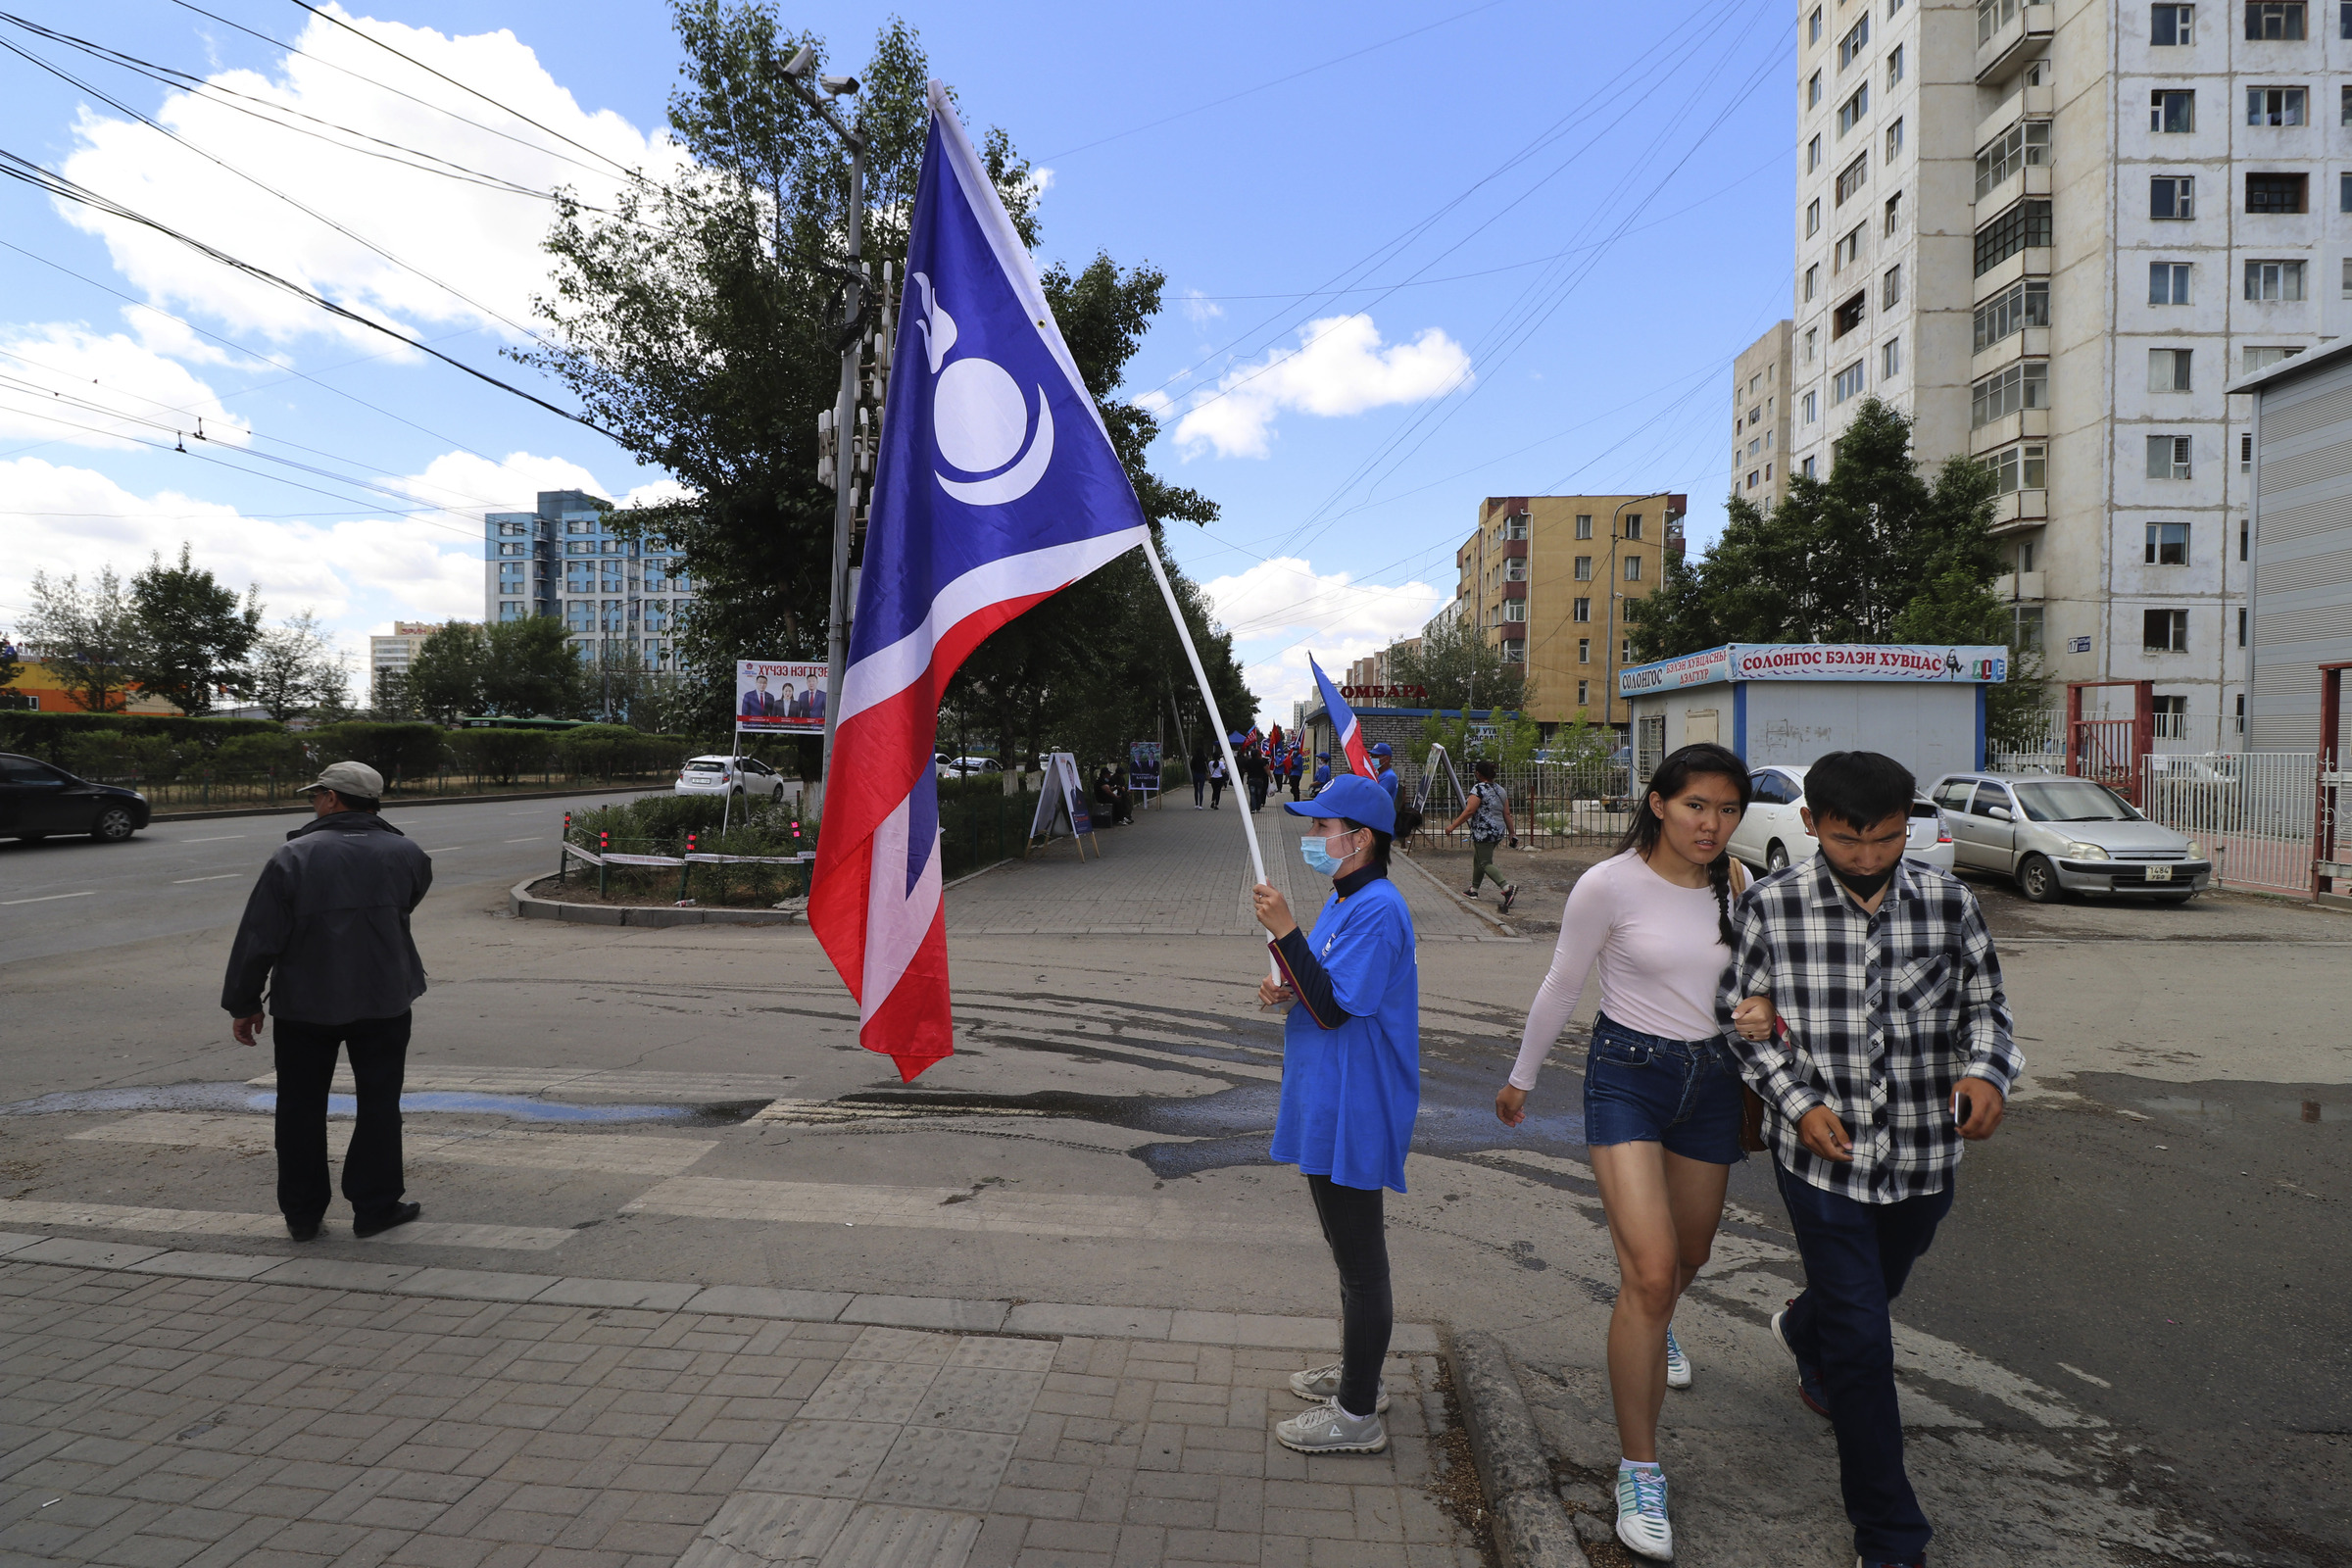 A couple walks past a Democratic Party campaign worker holding the party flag in the Songinokhairkhan district on the outskirts of Ulaanbaatar, Mongolia, Monday, June 22, 2020. Mongolia holds parliamentary elections on Wednesday, continuing a nearly 30-year democratic system in a vast but lightly populated country sandwiched between authoritarian regimes in Russia and China and beset by economic problems. (AP Photo/Ganbat Namjilsangarav)